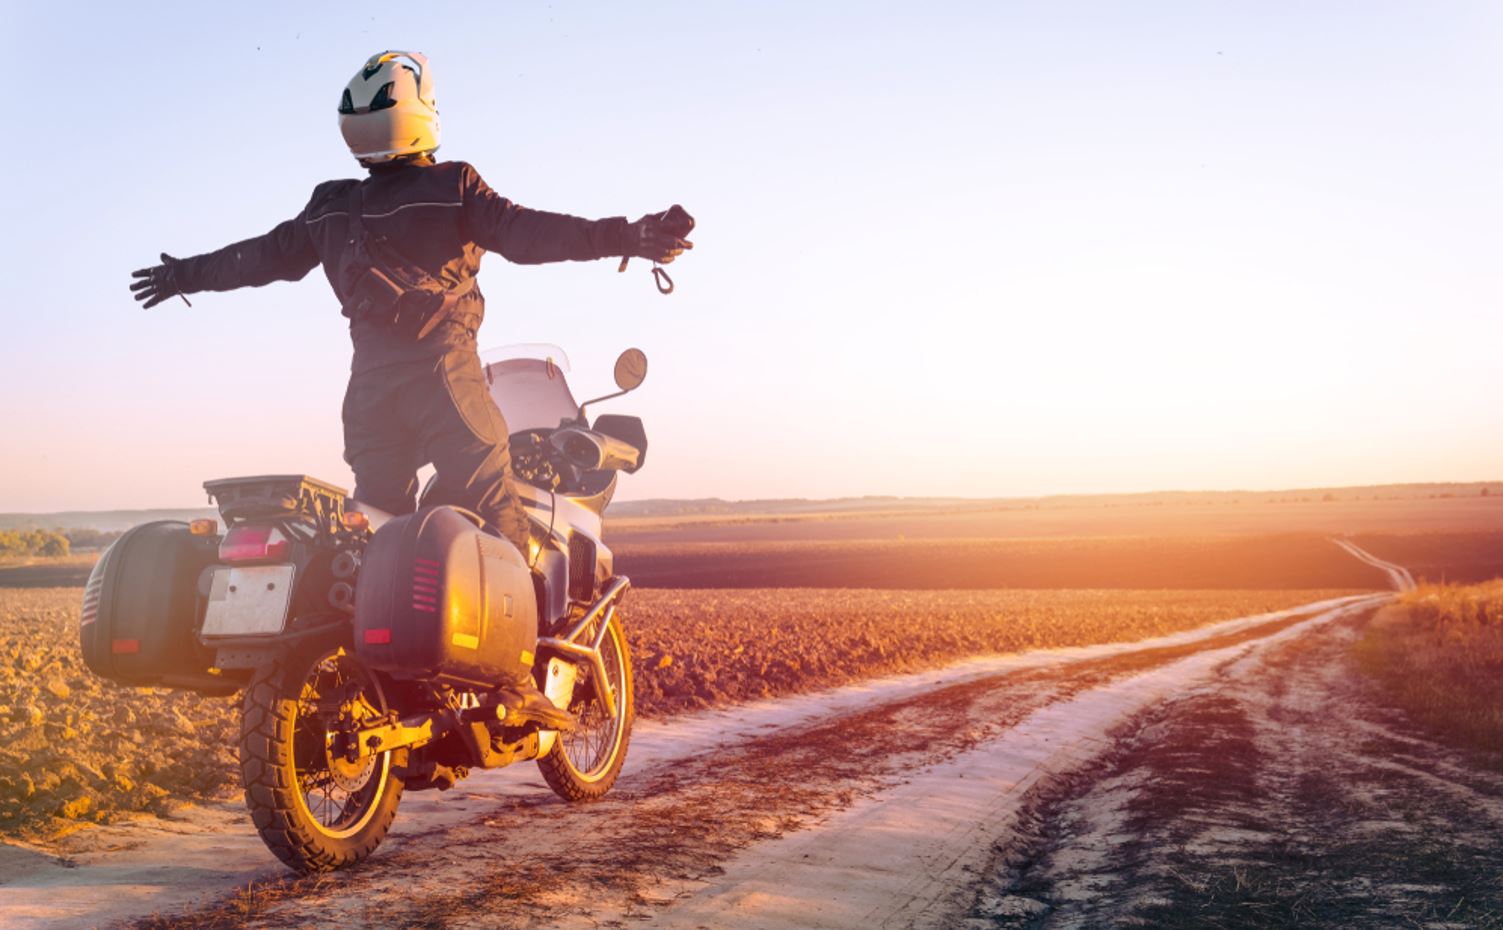 7 Tips for Making Cool Motorcycle Travel Videos